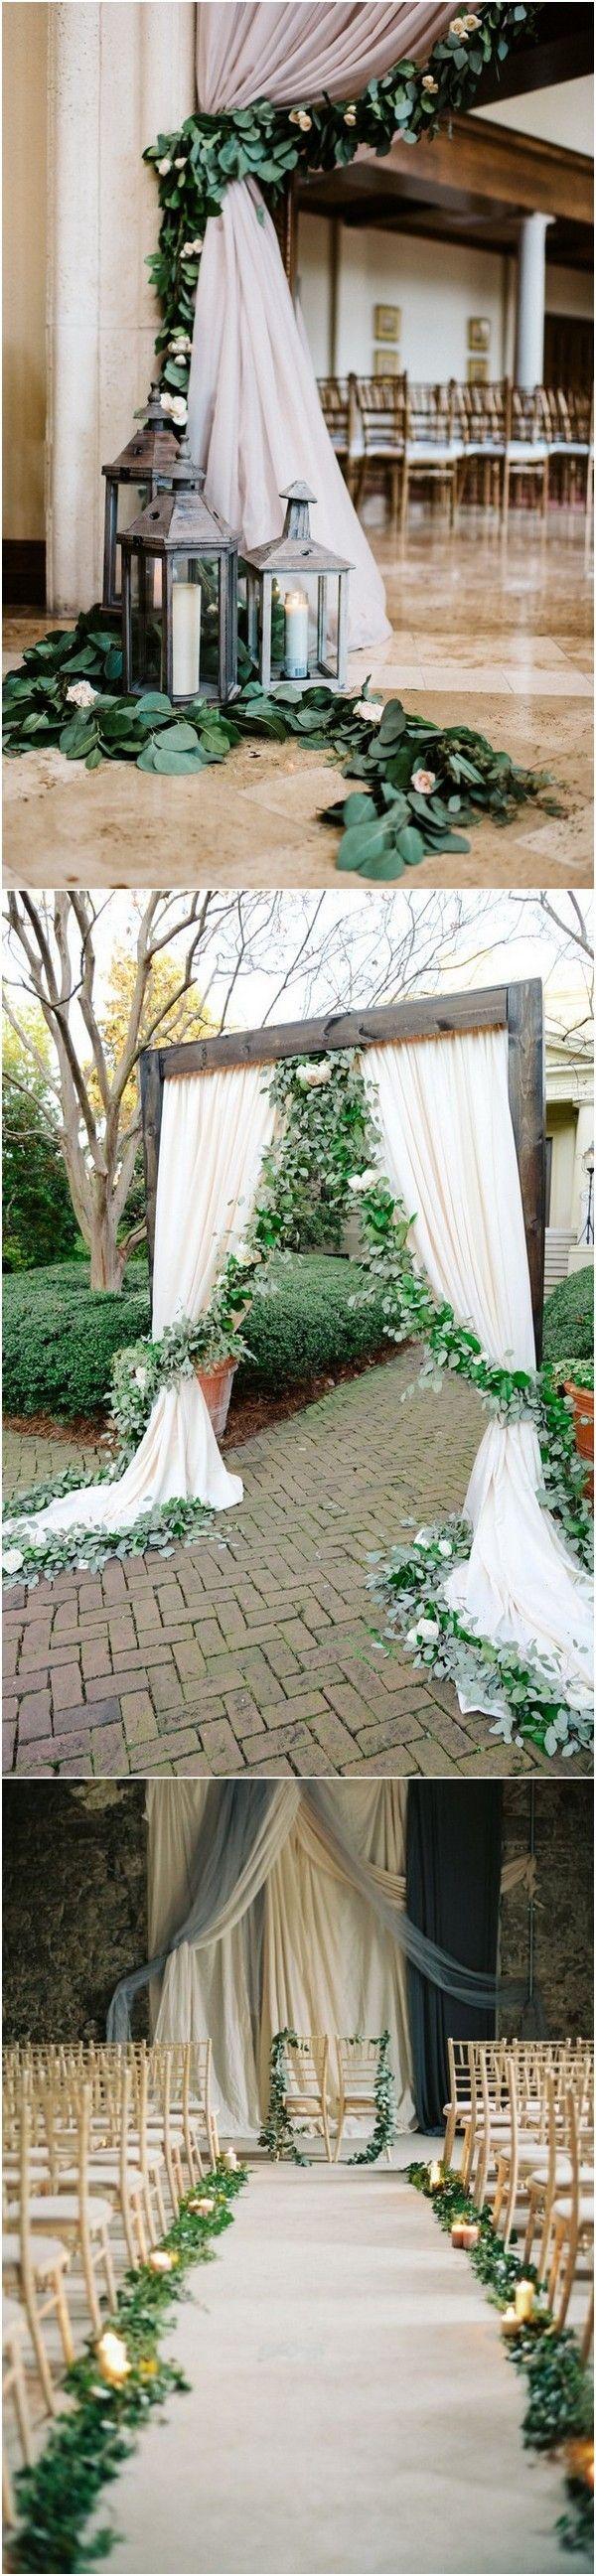 Wedding - Trending-21 Elegant Green And Grey Wedding Color Ideas For 2018 - Page 3 Of 4